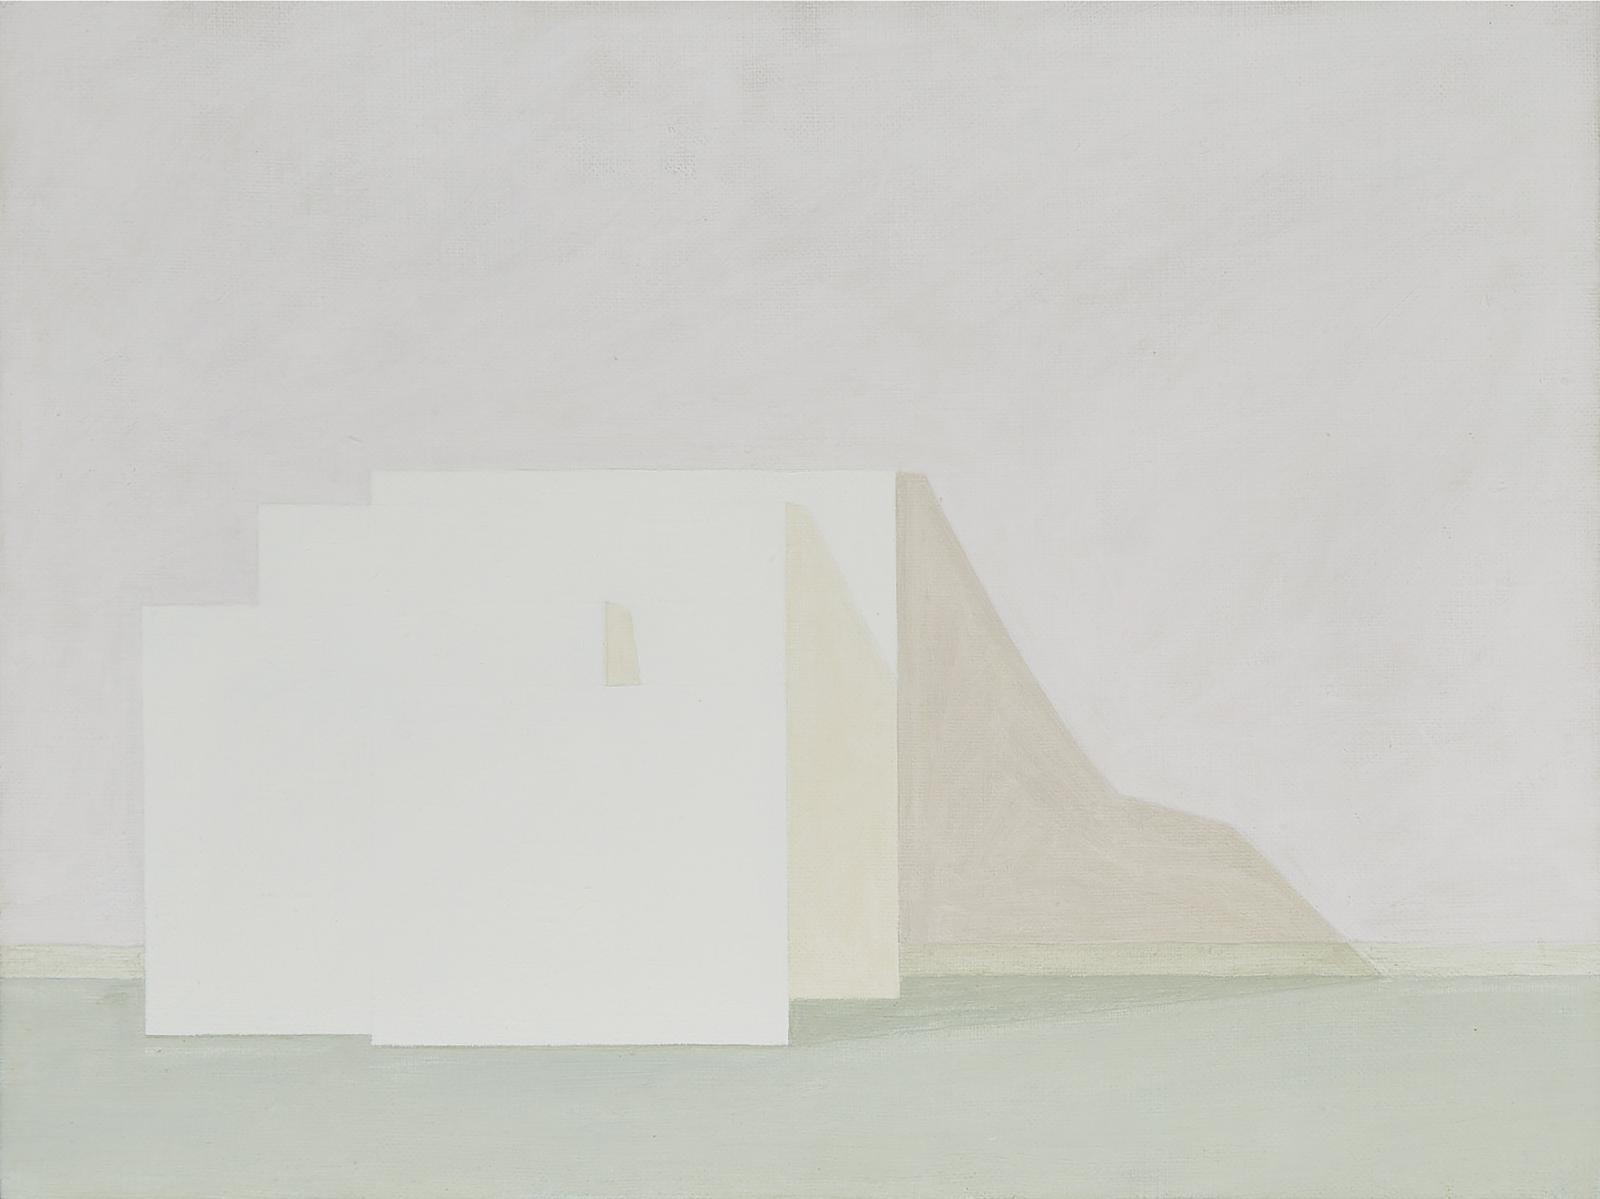 Malcolm Rains (1947) - Studio Interior With Four Canvases, 1983